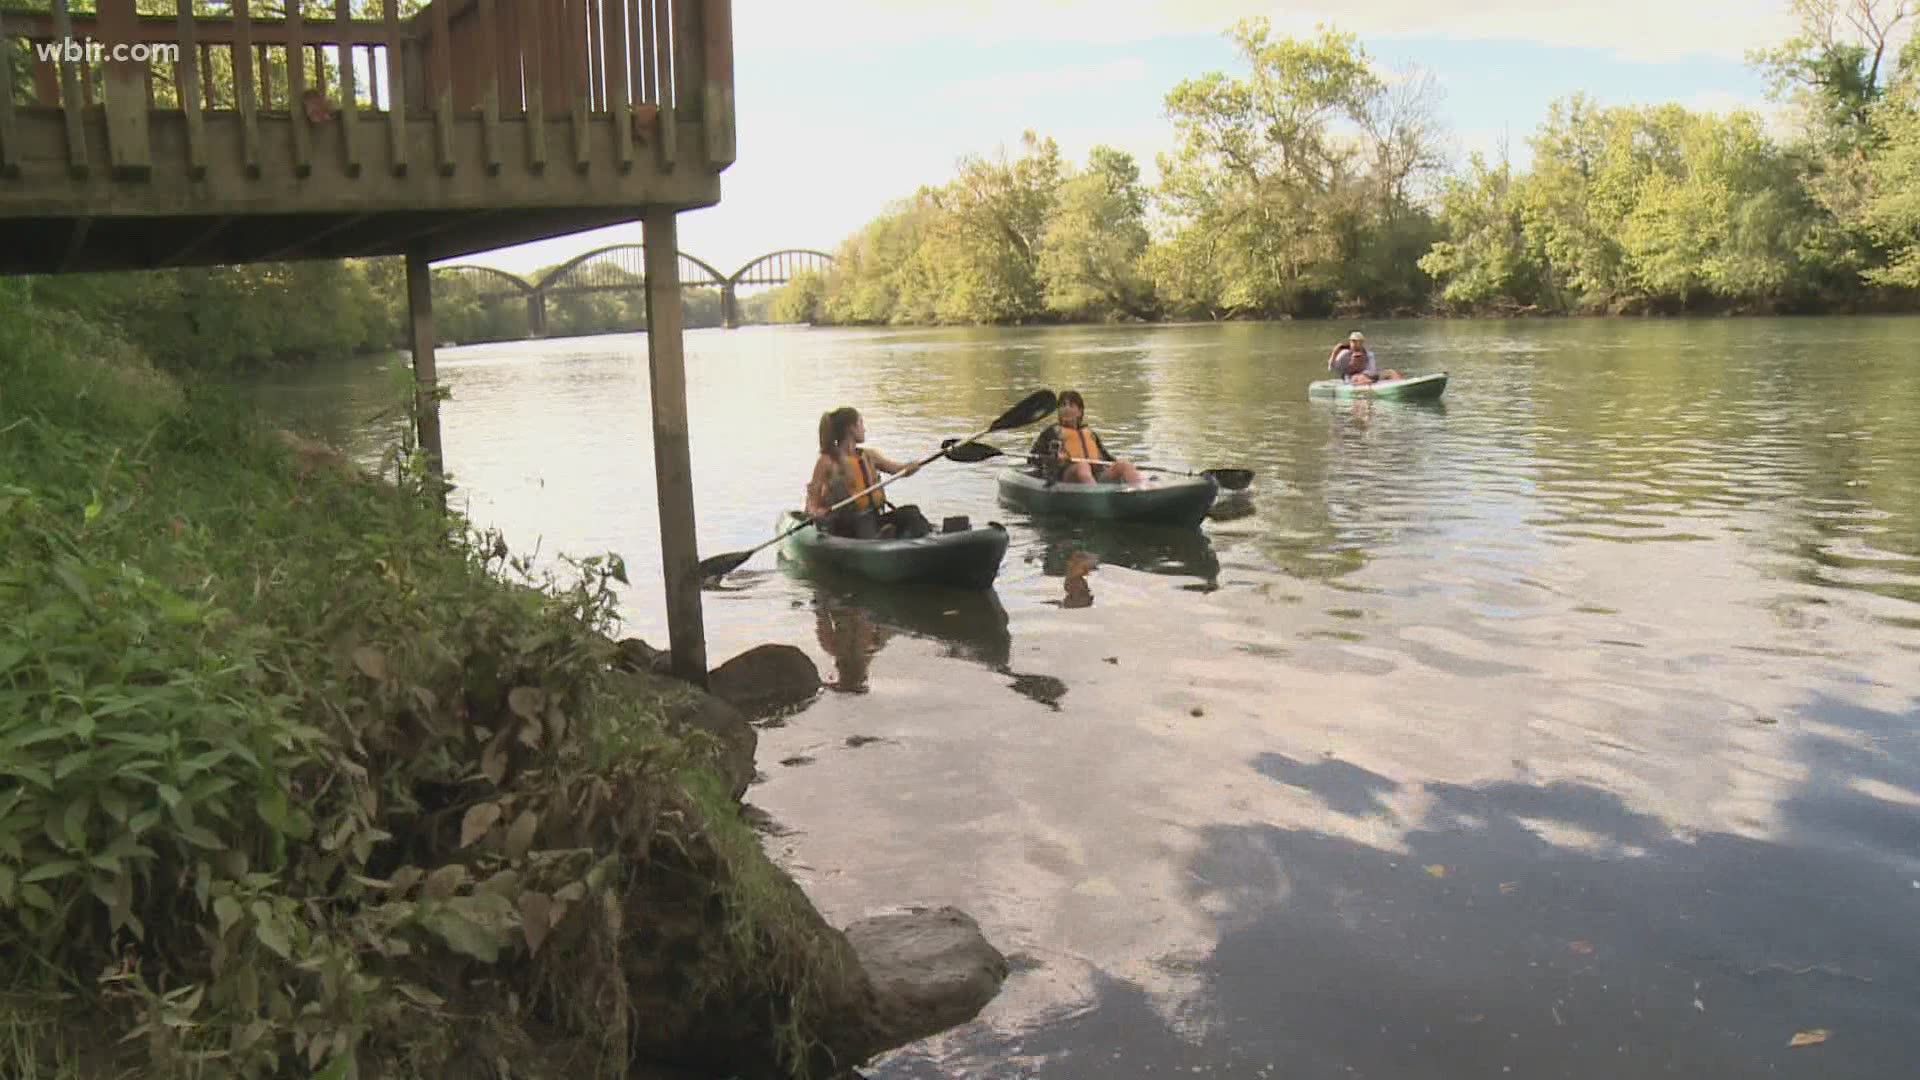 The new park is designed to make the Holston River more accessible.